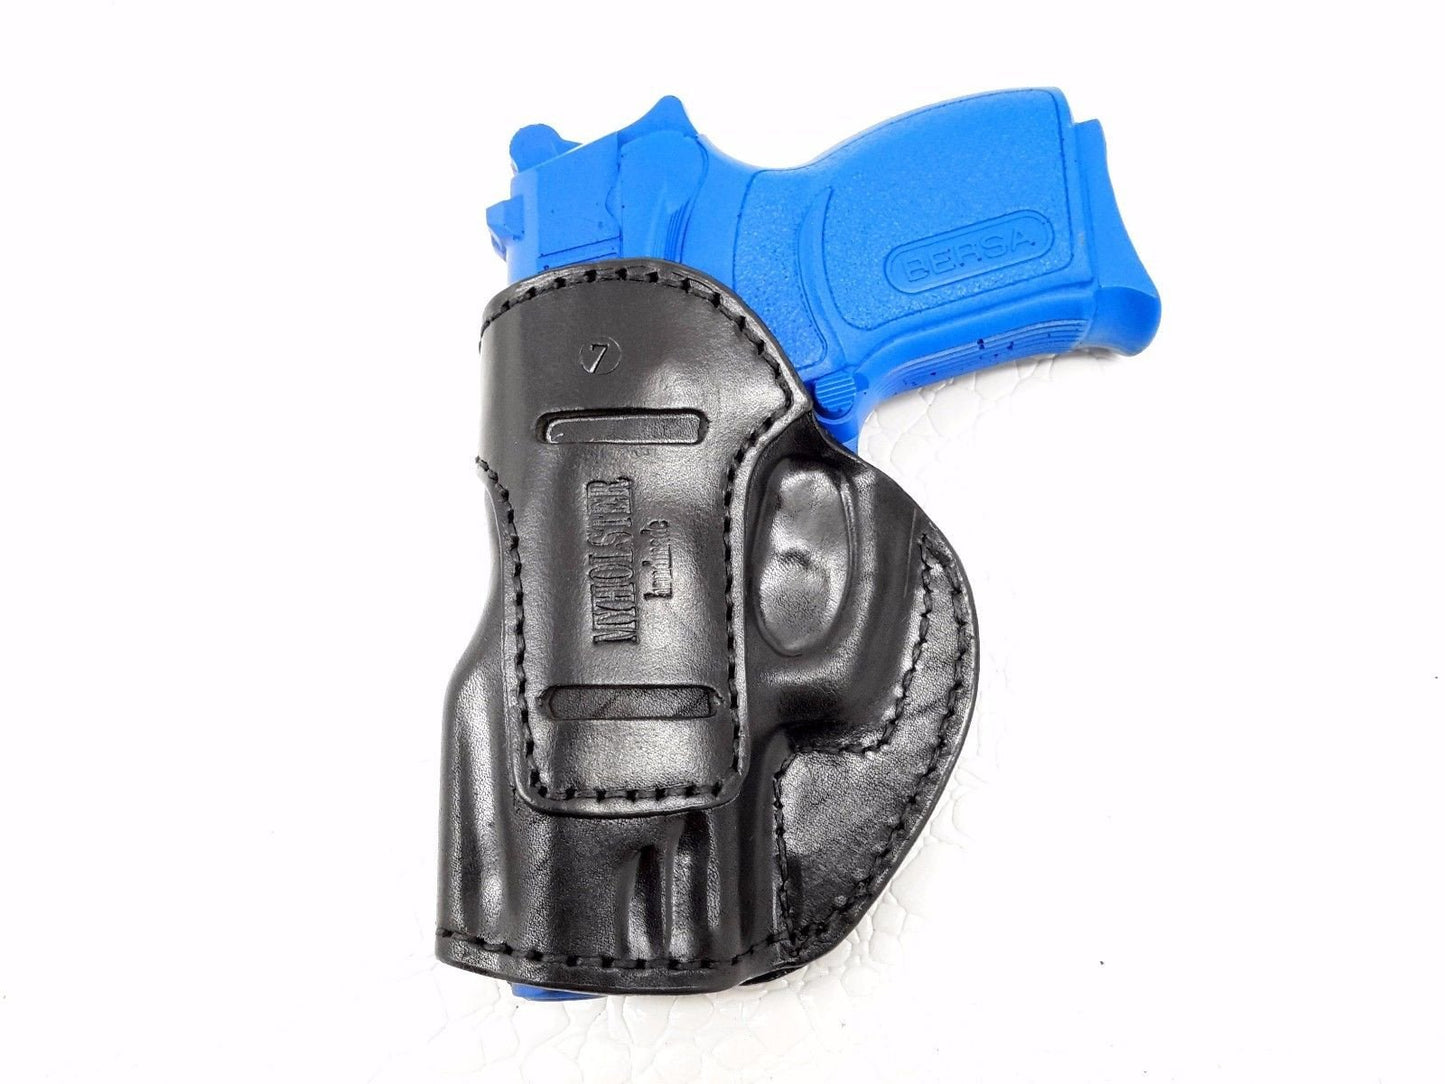 Smith & Wesson CS9 Chiefs Special 9mm IWB Inside the Waistband holster